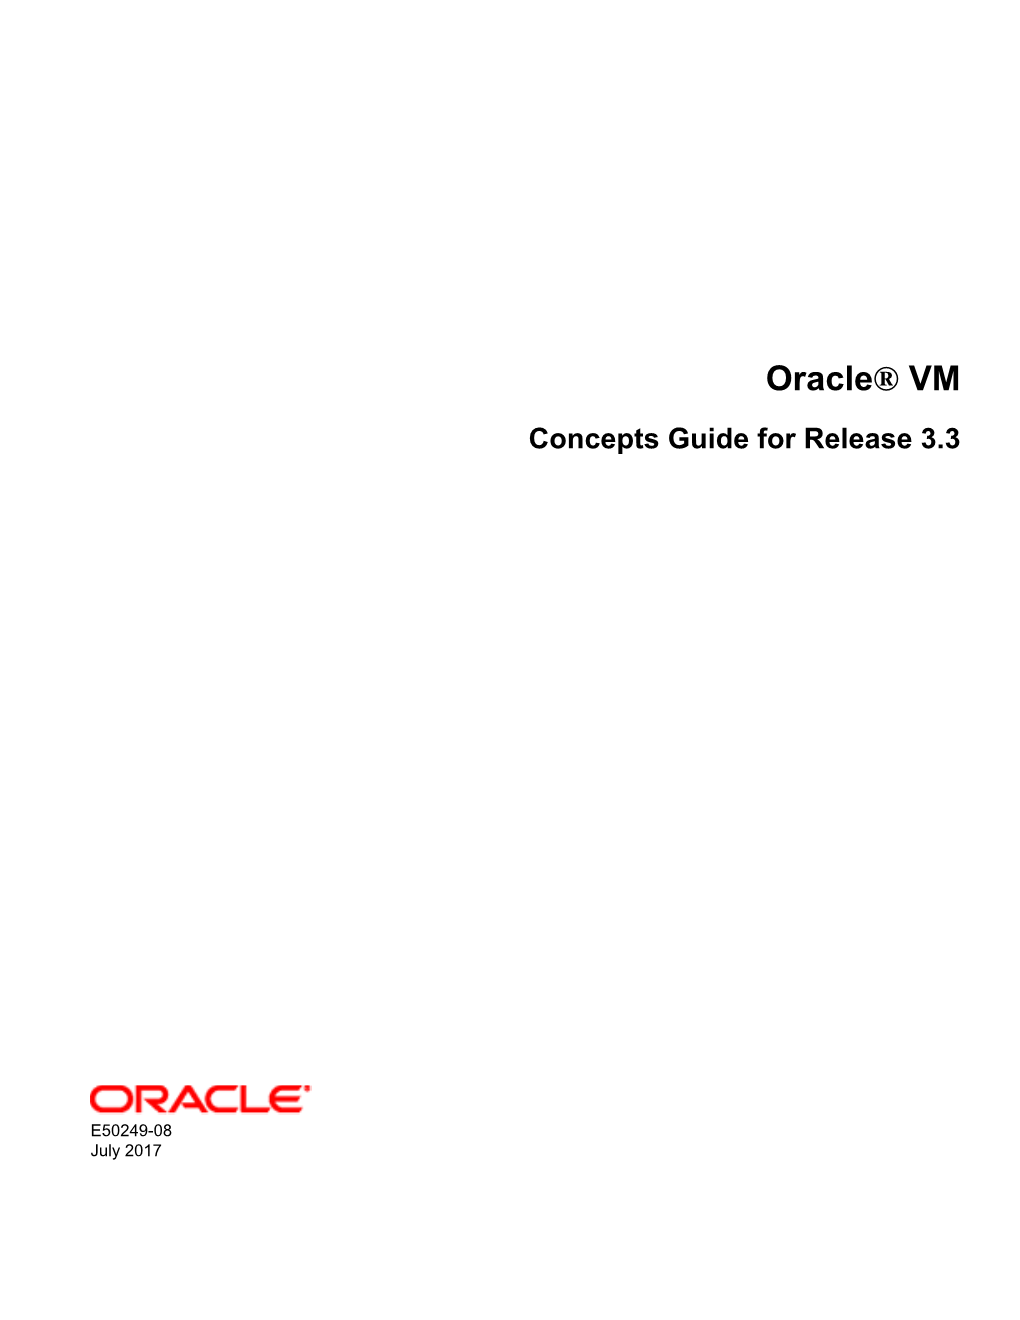 Oracle® VM Concepts Guide for Release 3.3